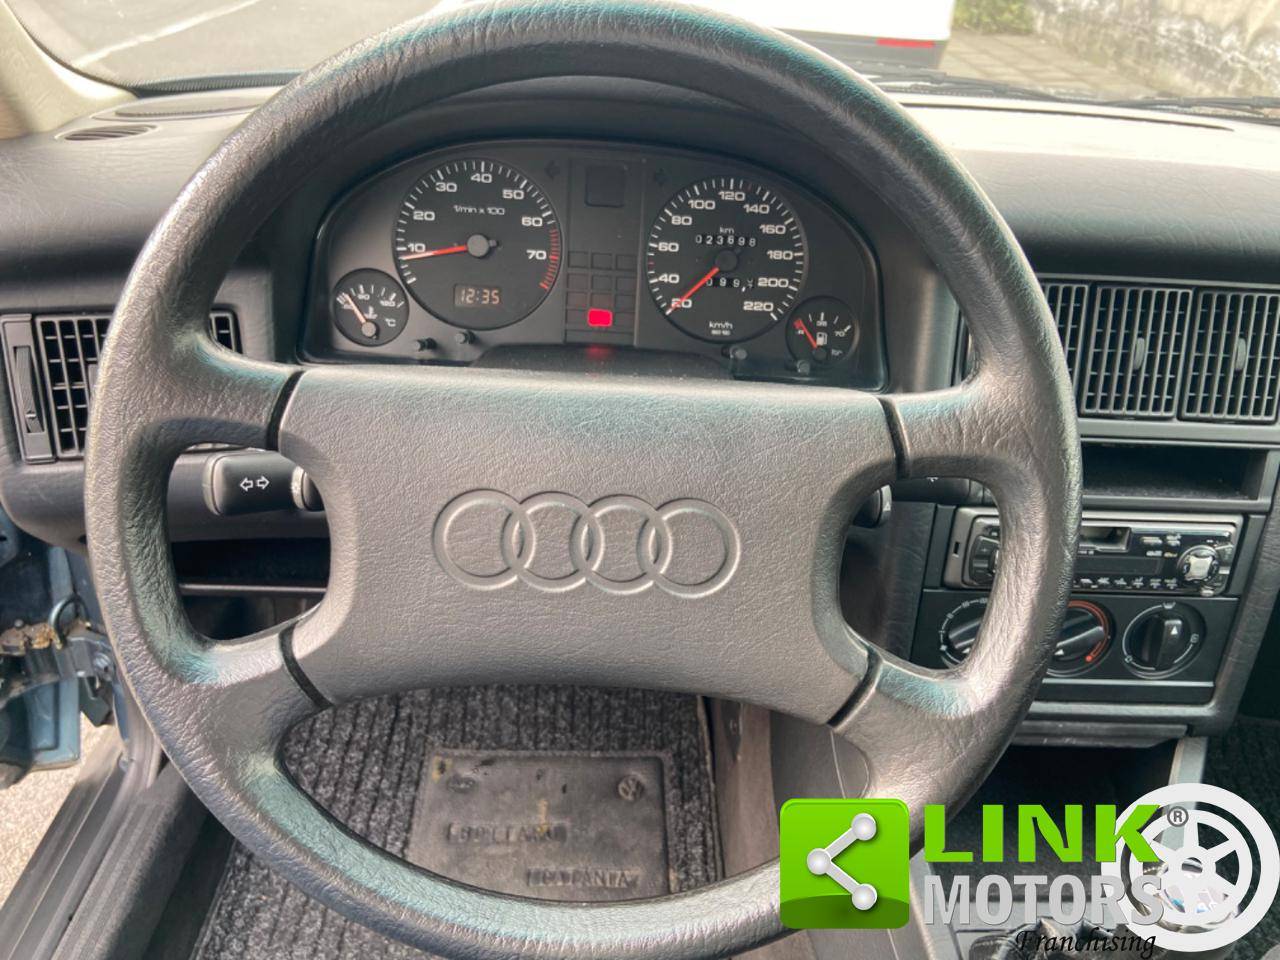 For Sale: Audi 80 quattro - 1.8S (1990) offered for €5,490